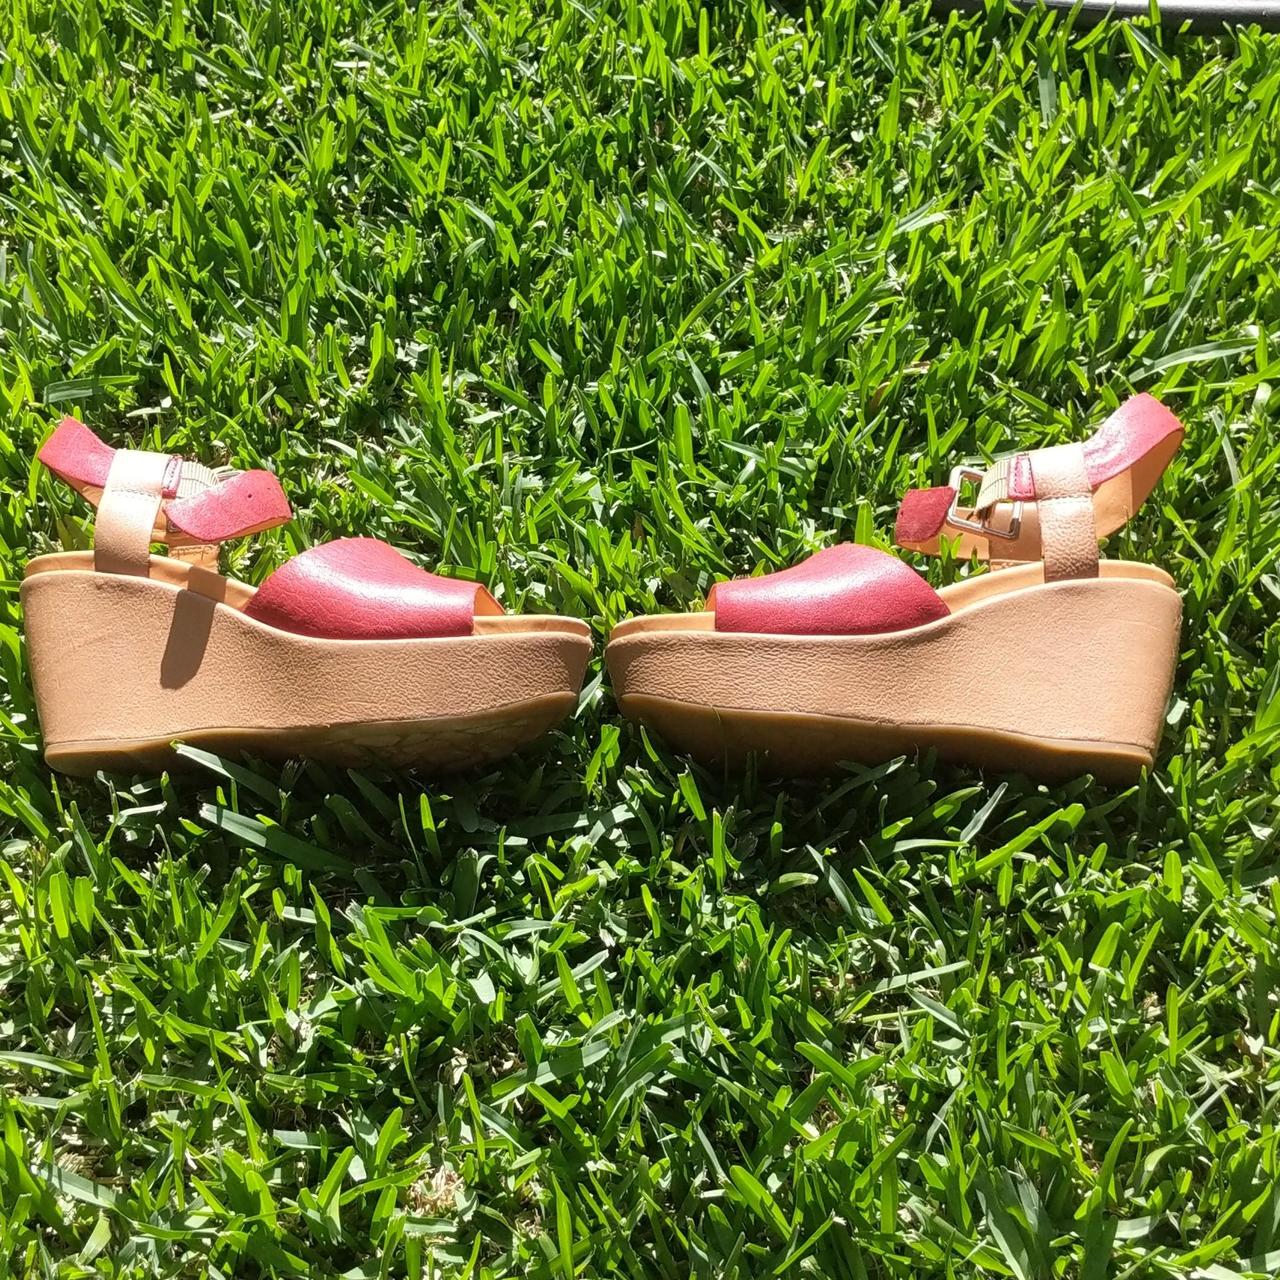 Korks Women's Tan and Red Sandals (3)